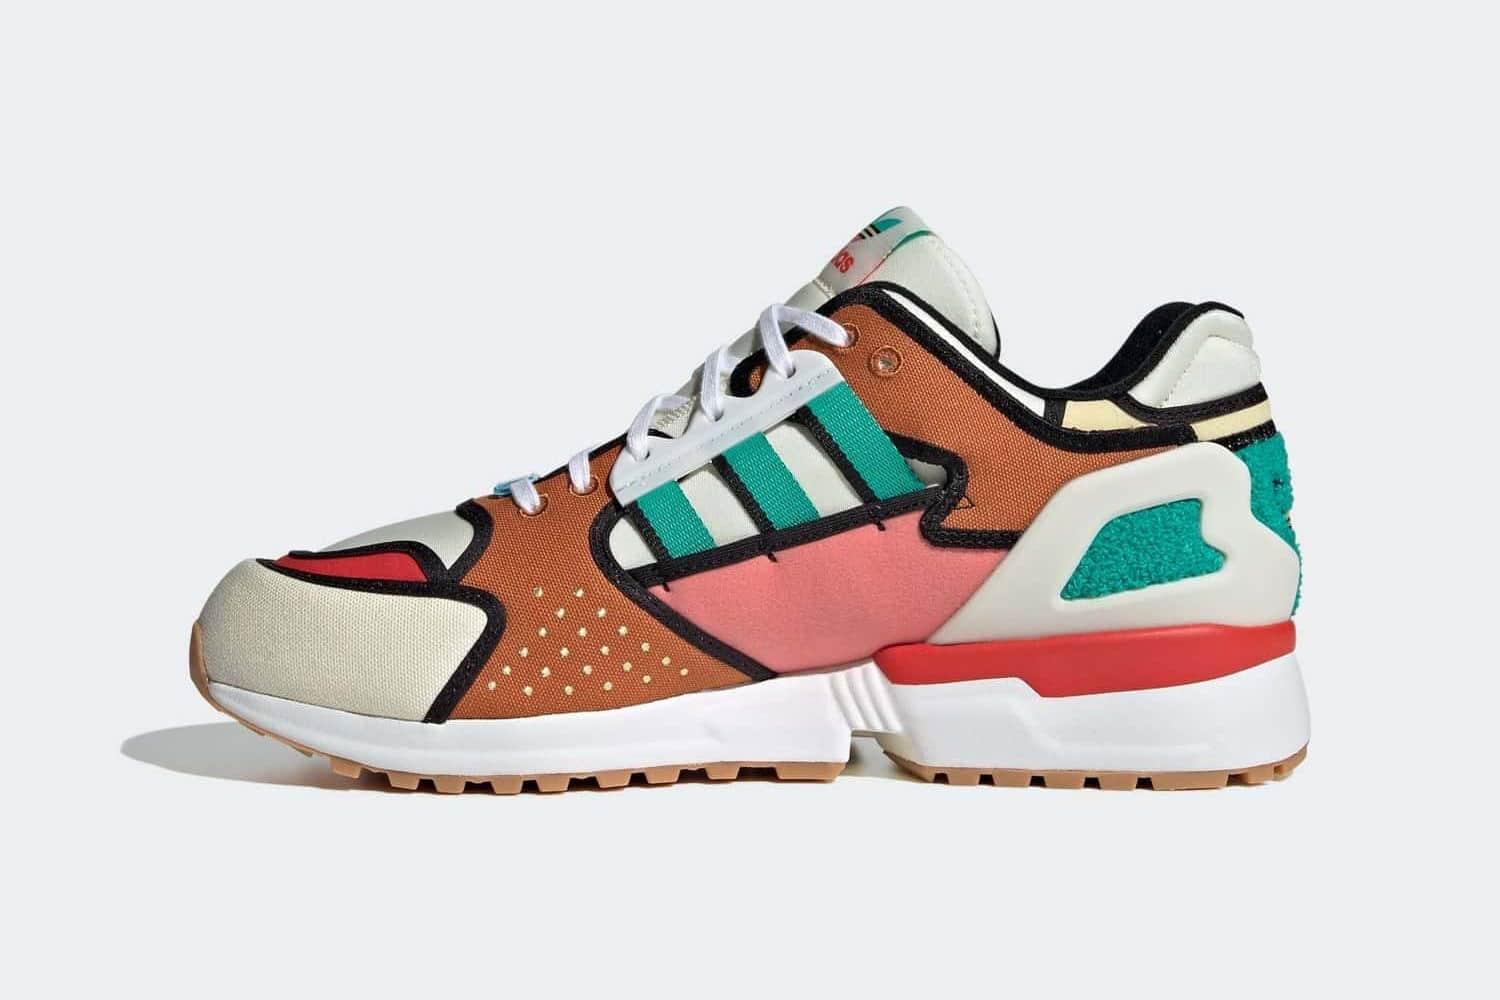 adidas ZX 10000 Krusty Burger The Simpsons (A-ZX Series 2021) H05783 2